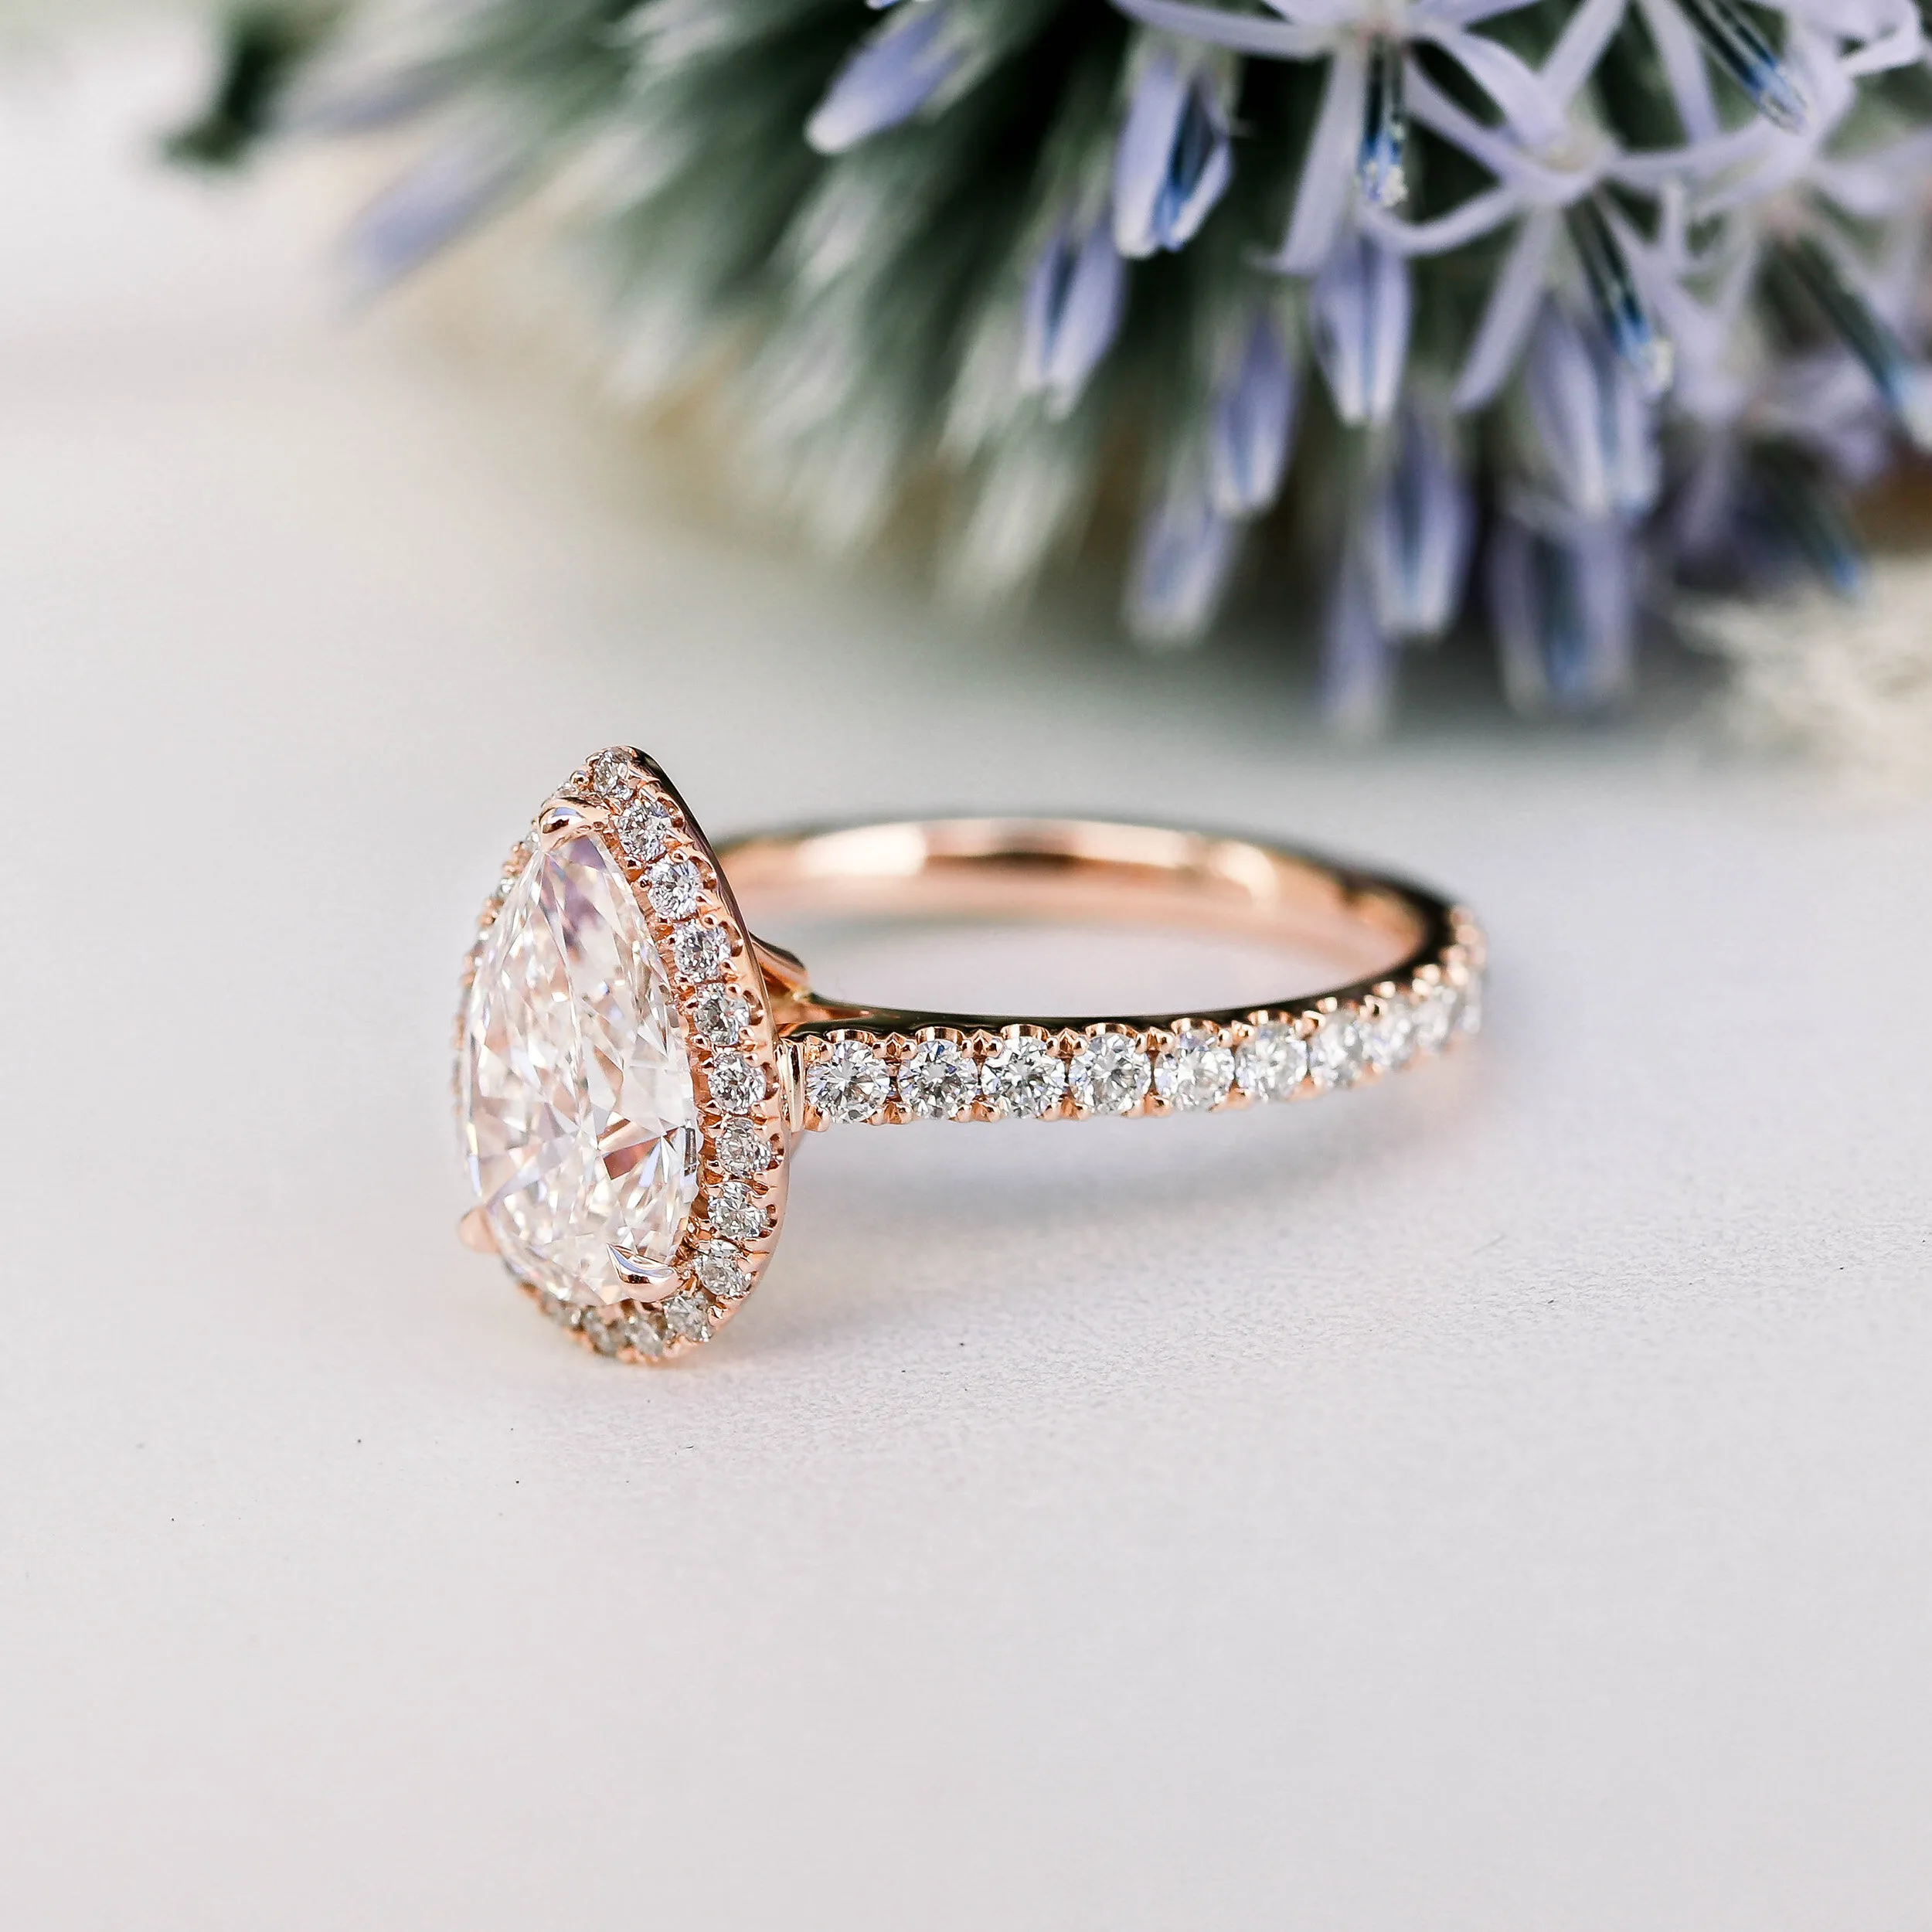 18k Rose Gold 2 Carat Pear Halo Engagement Ring with Diamonds Around the Band made with lab grown diamonds Ada Diamonds Design AD-304